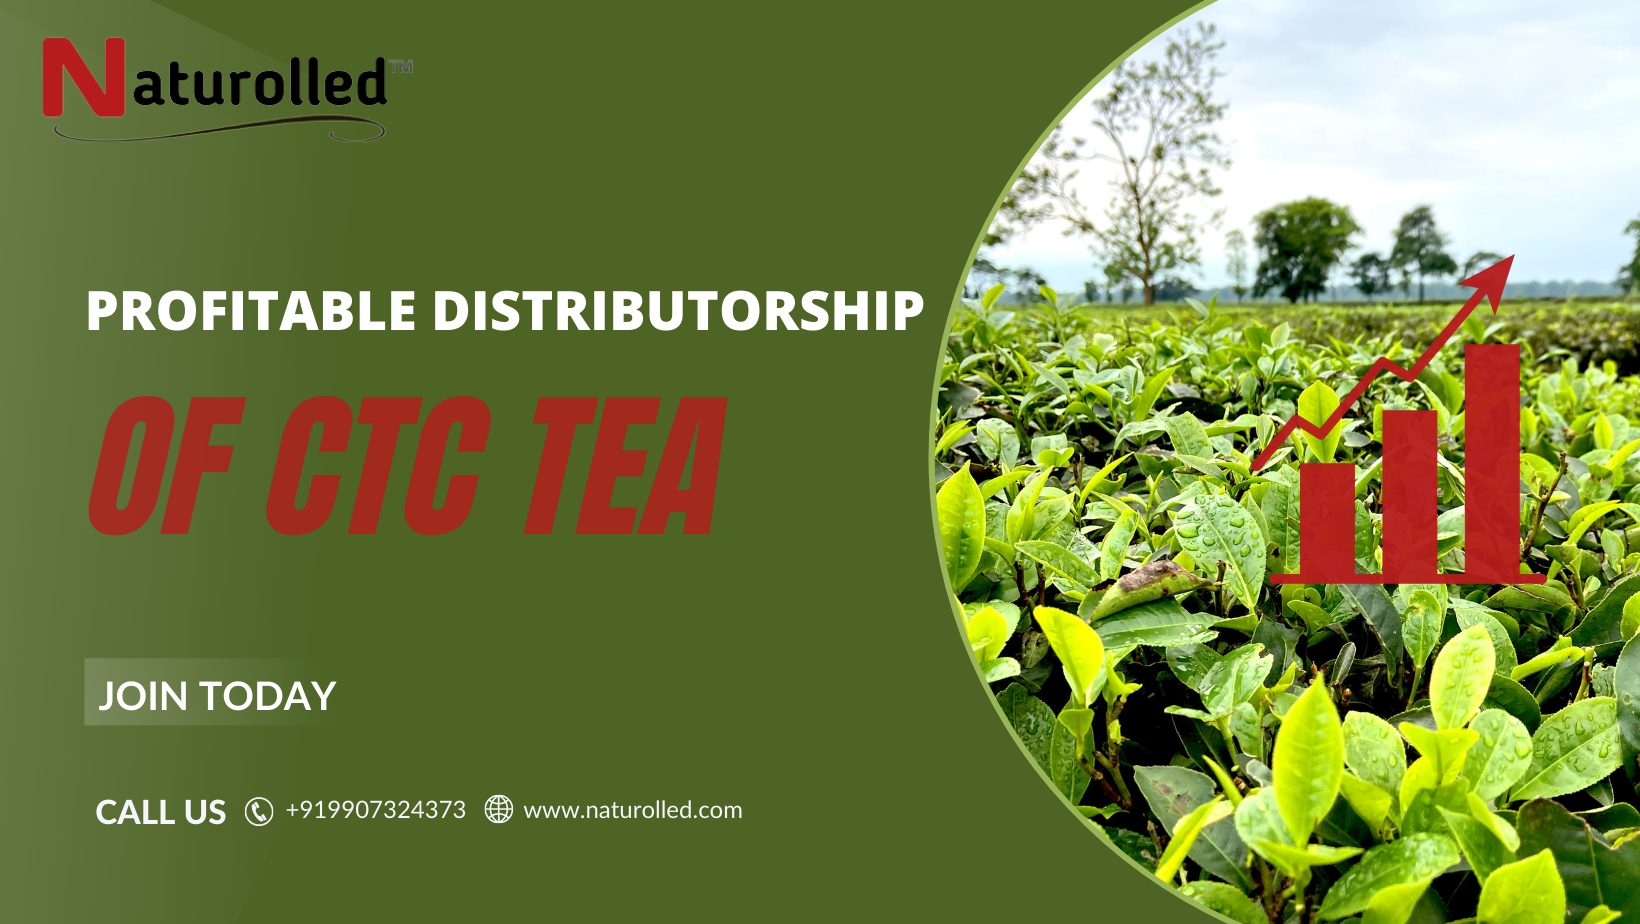 Start Your CTC Tea Business With a Distributorship